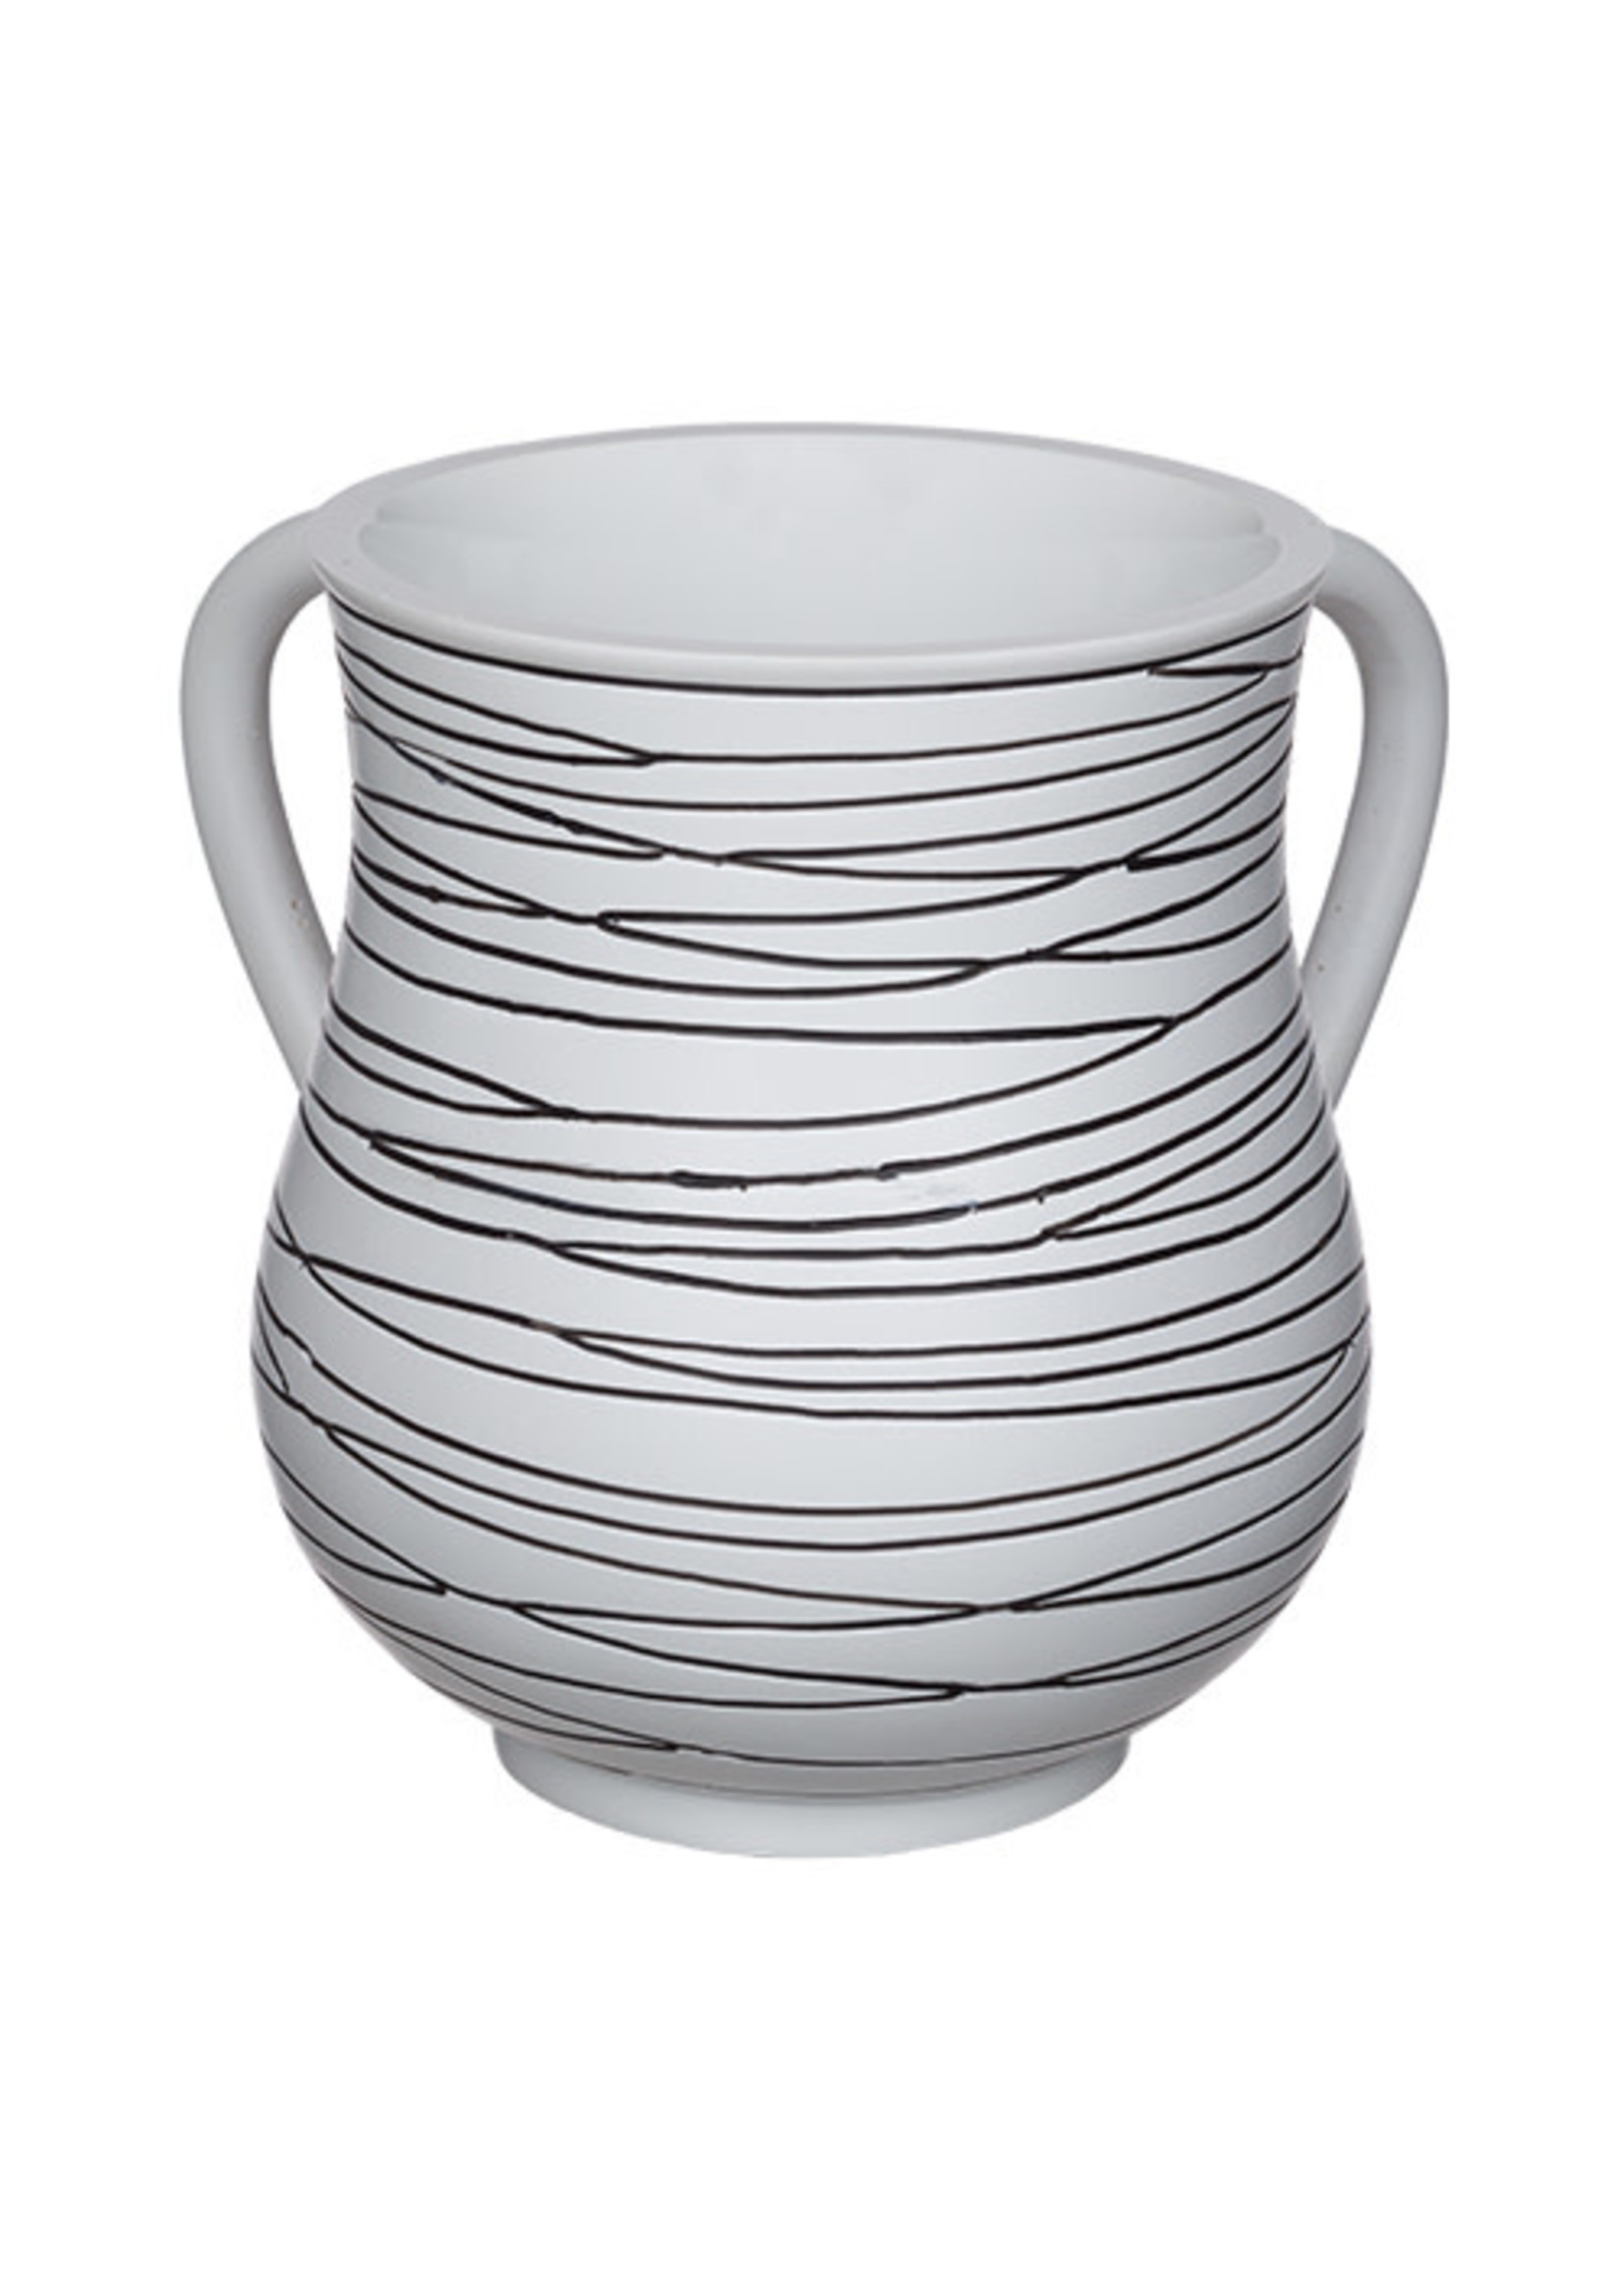 WASHING CUP WHITE WITH LINES